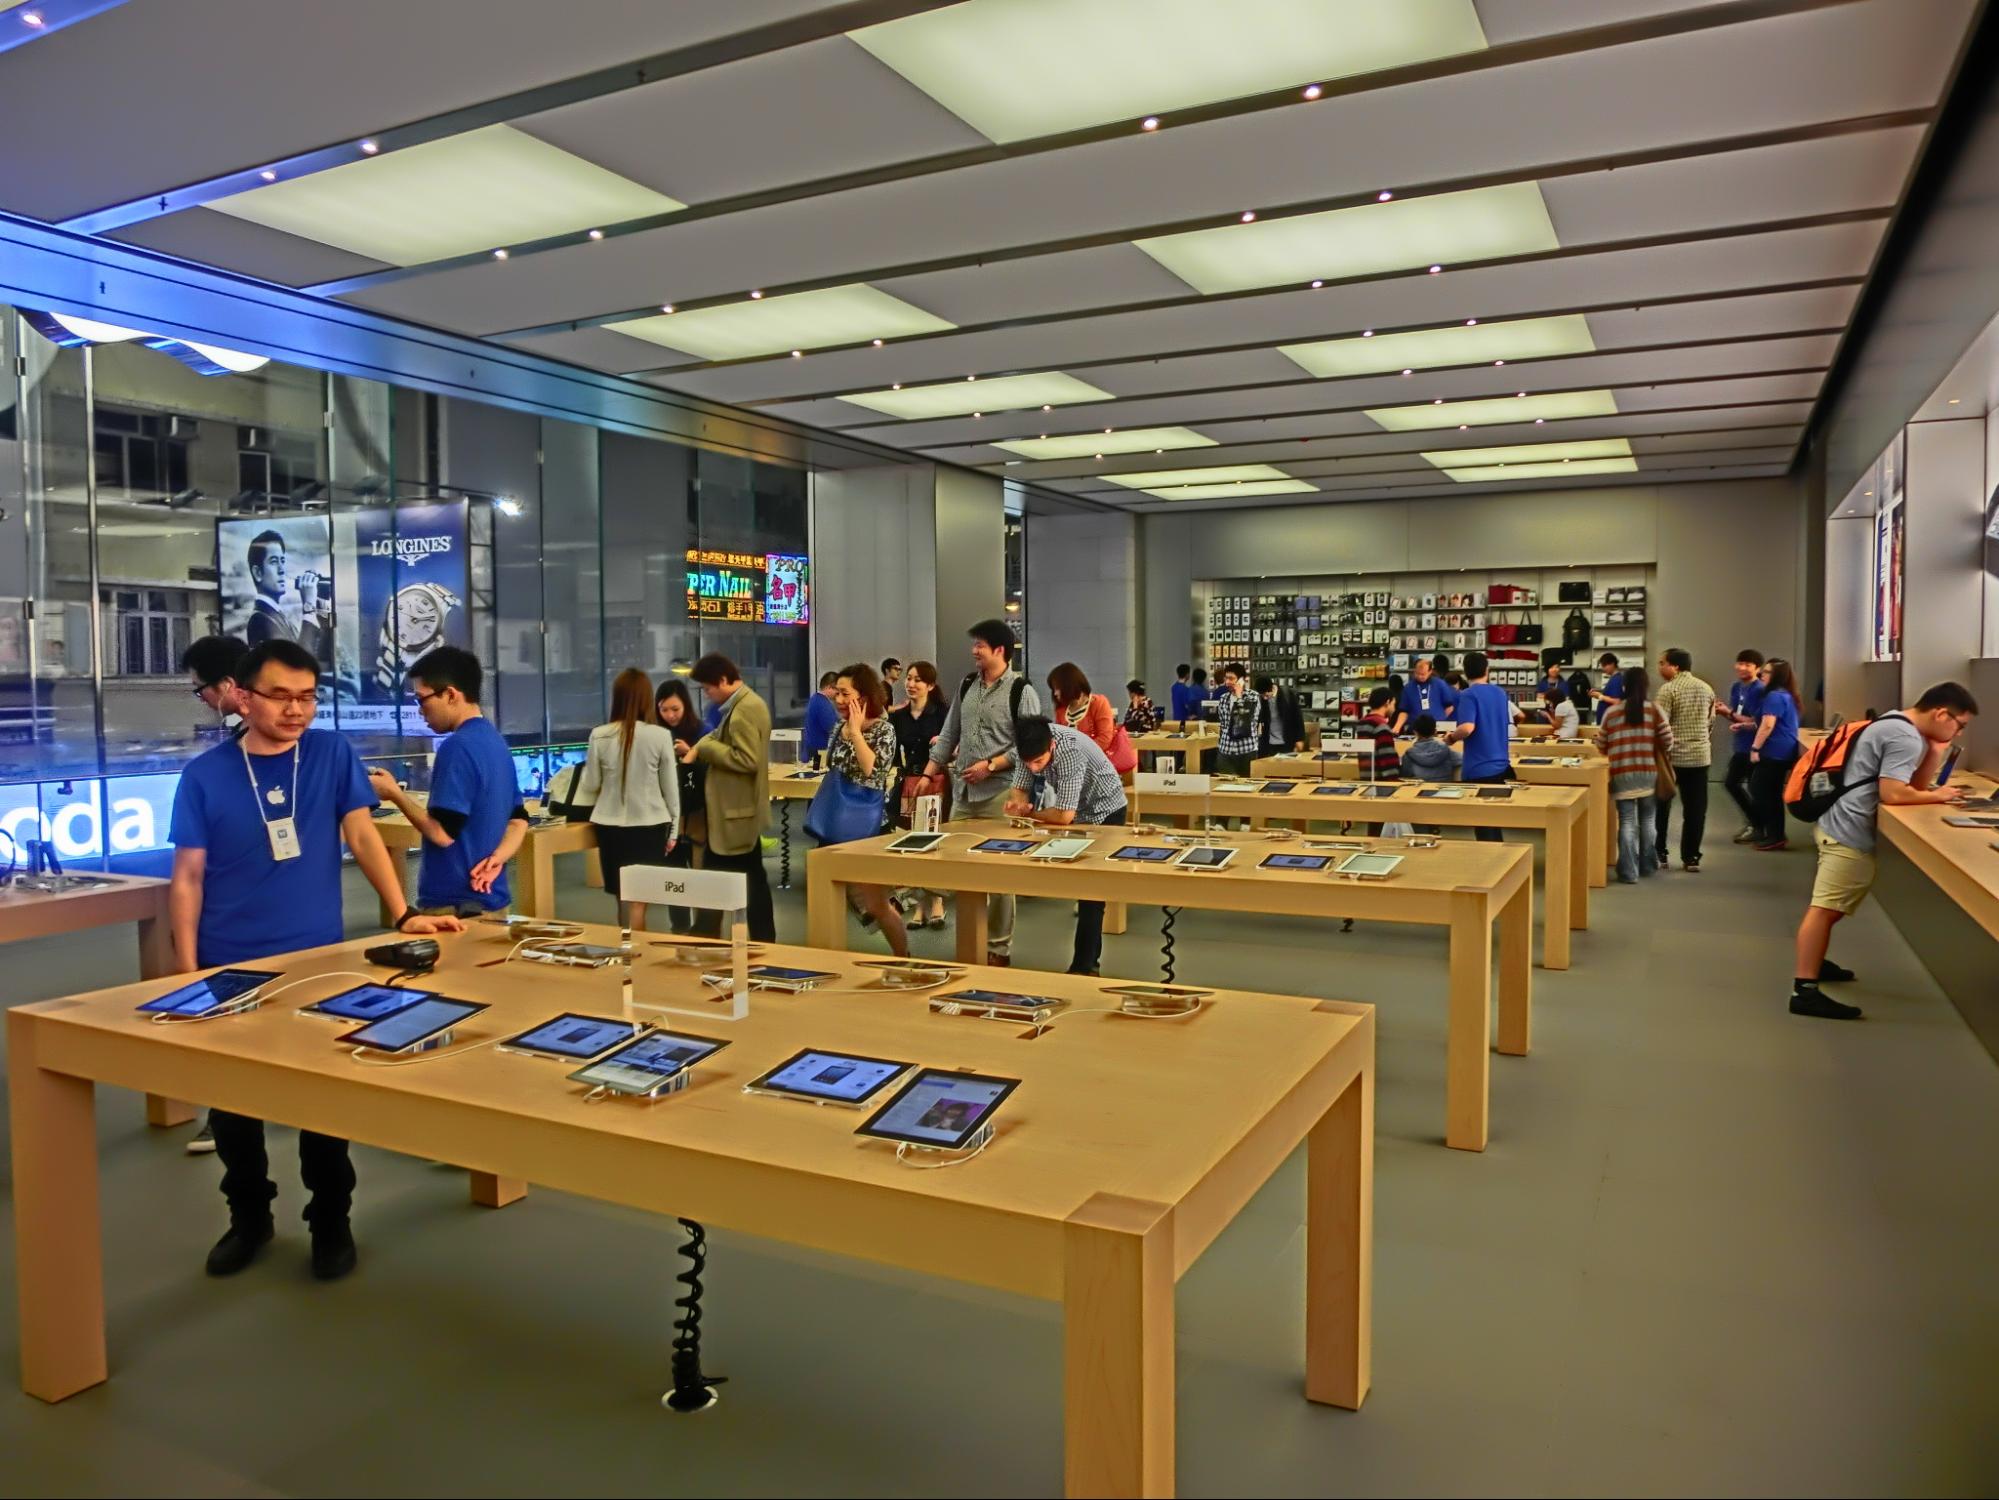 apple marketing tips apple retails store example 